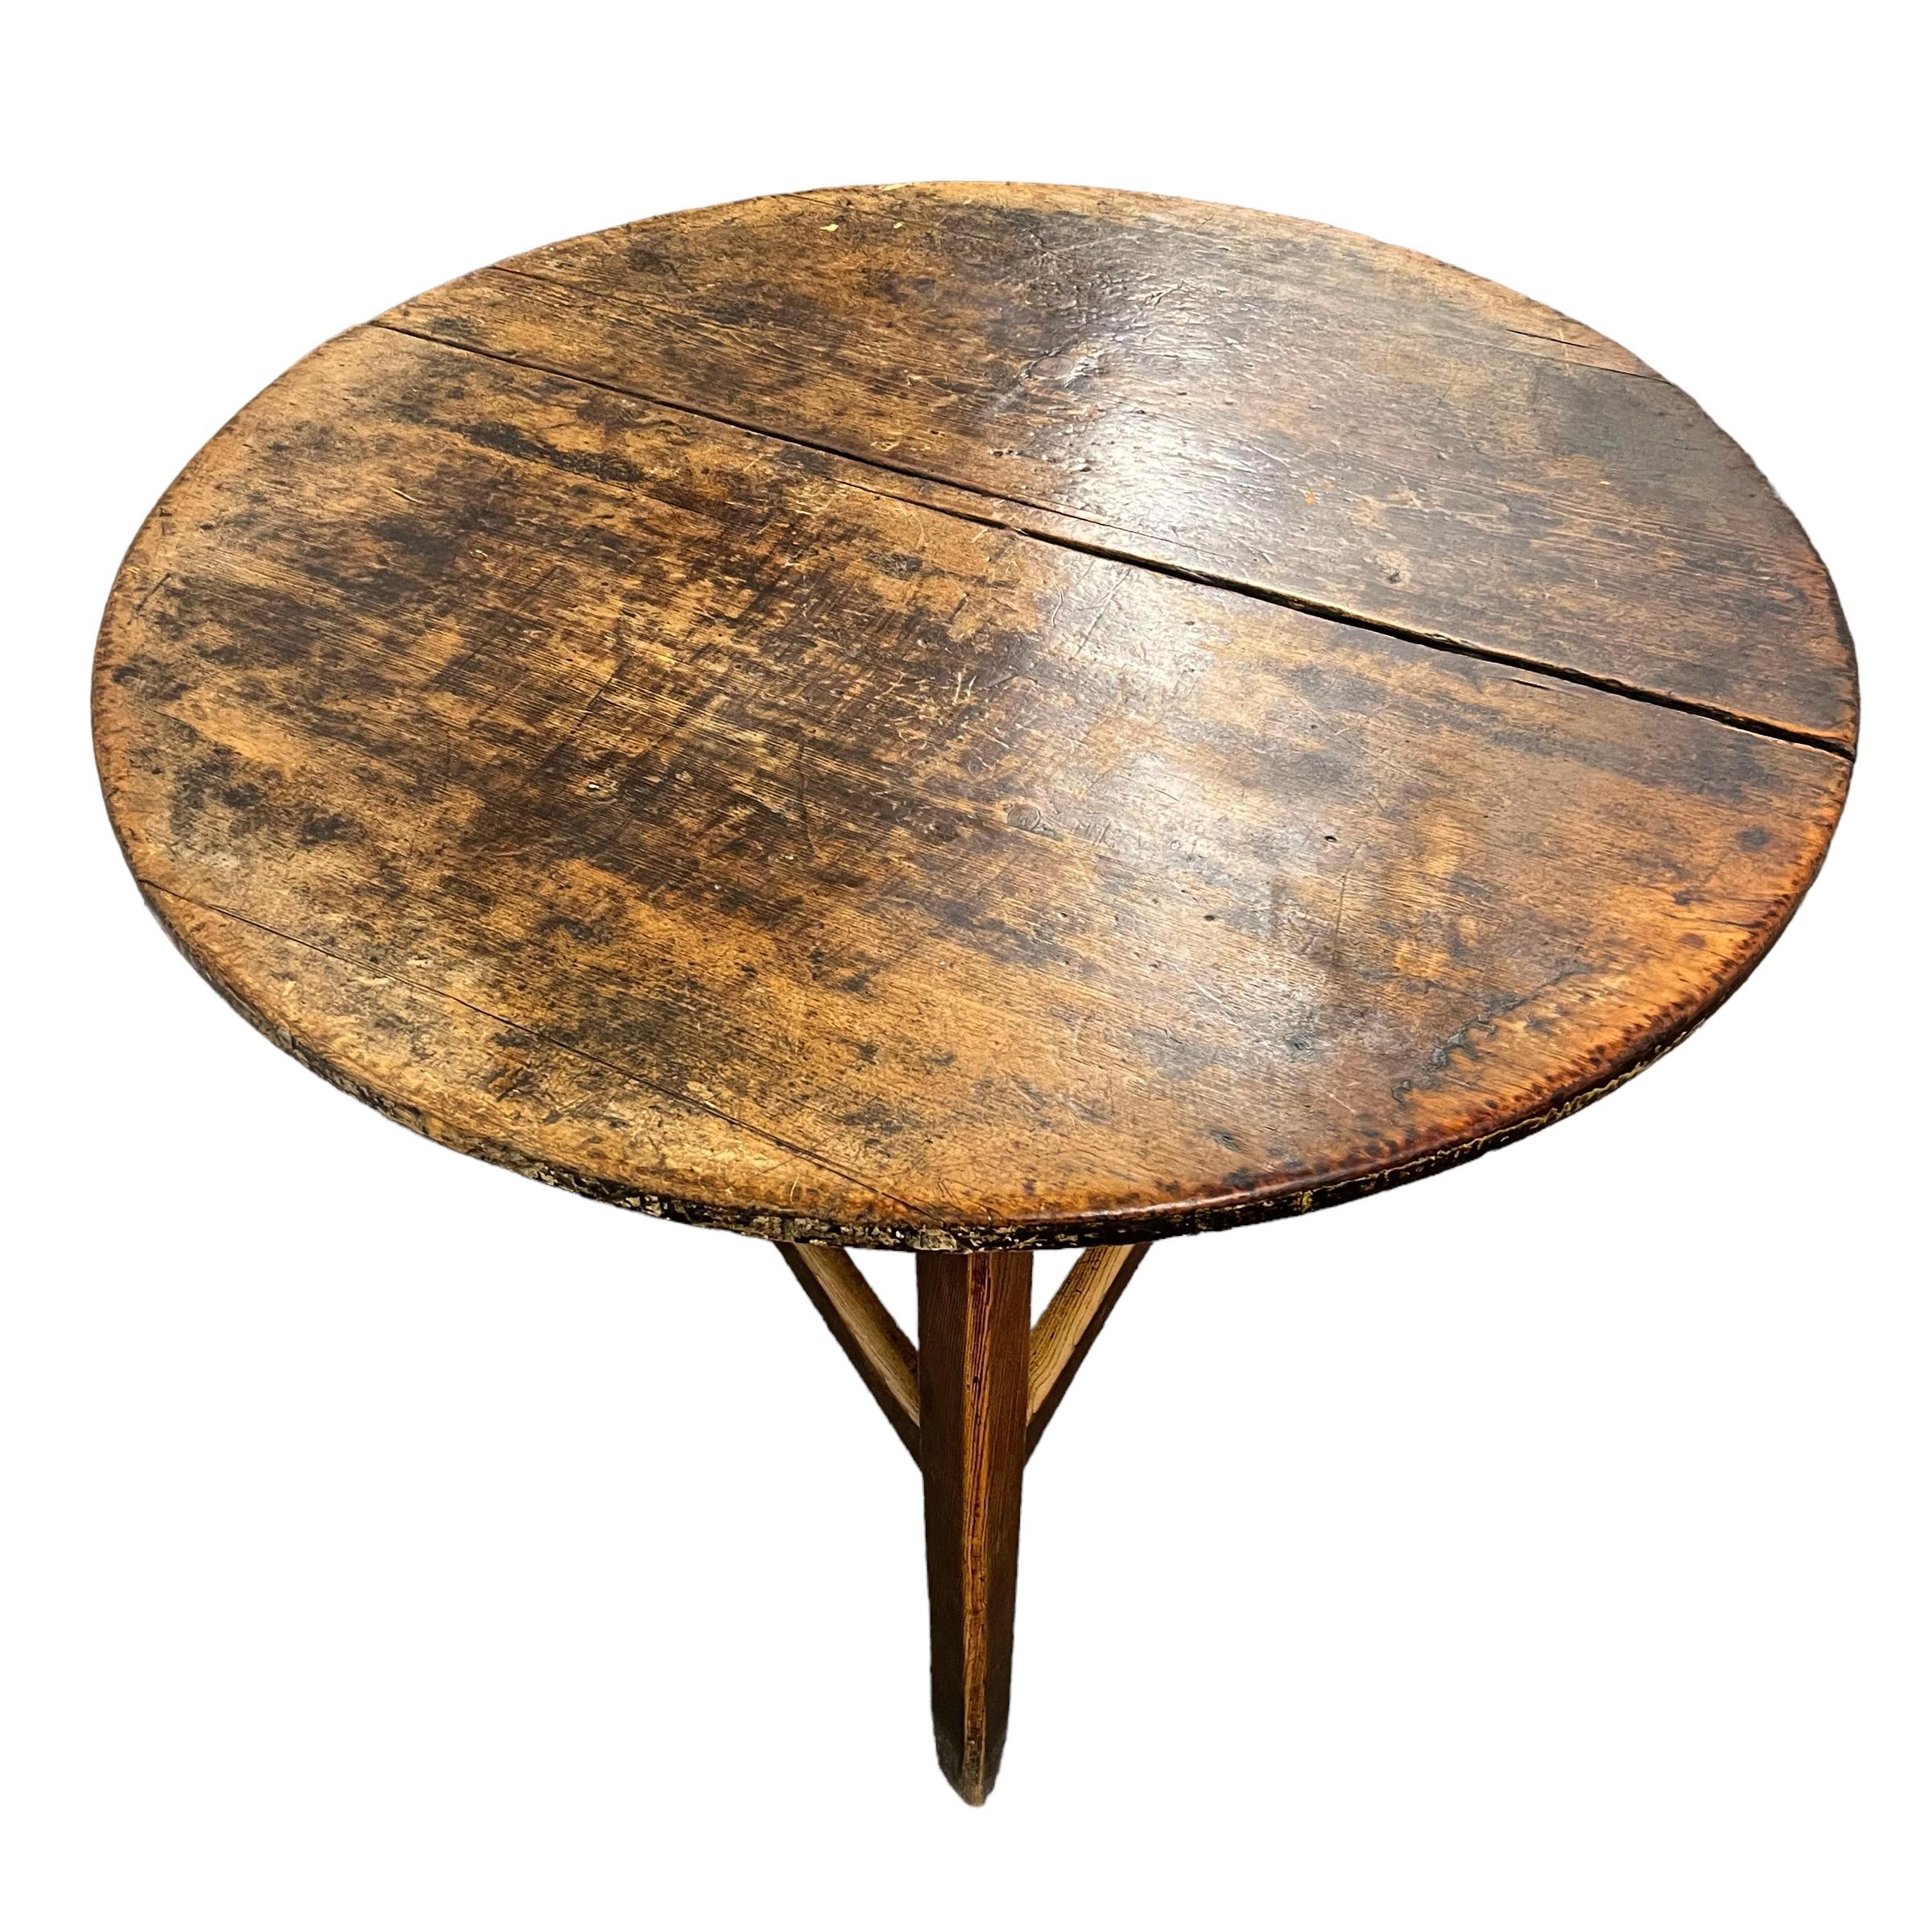 Primitive Rather Large 19th Century English Cricket Table For Sale